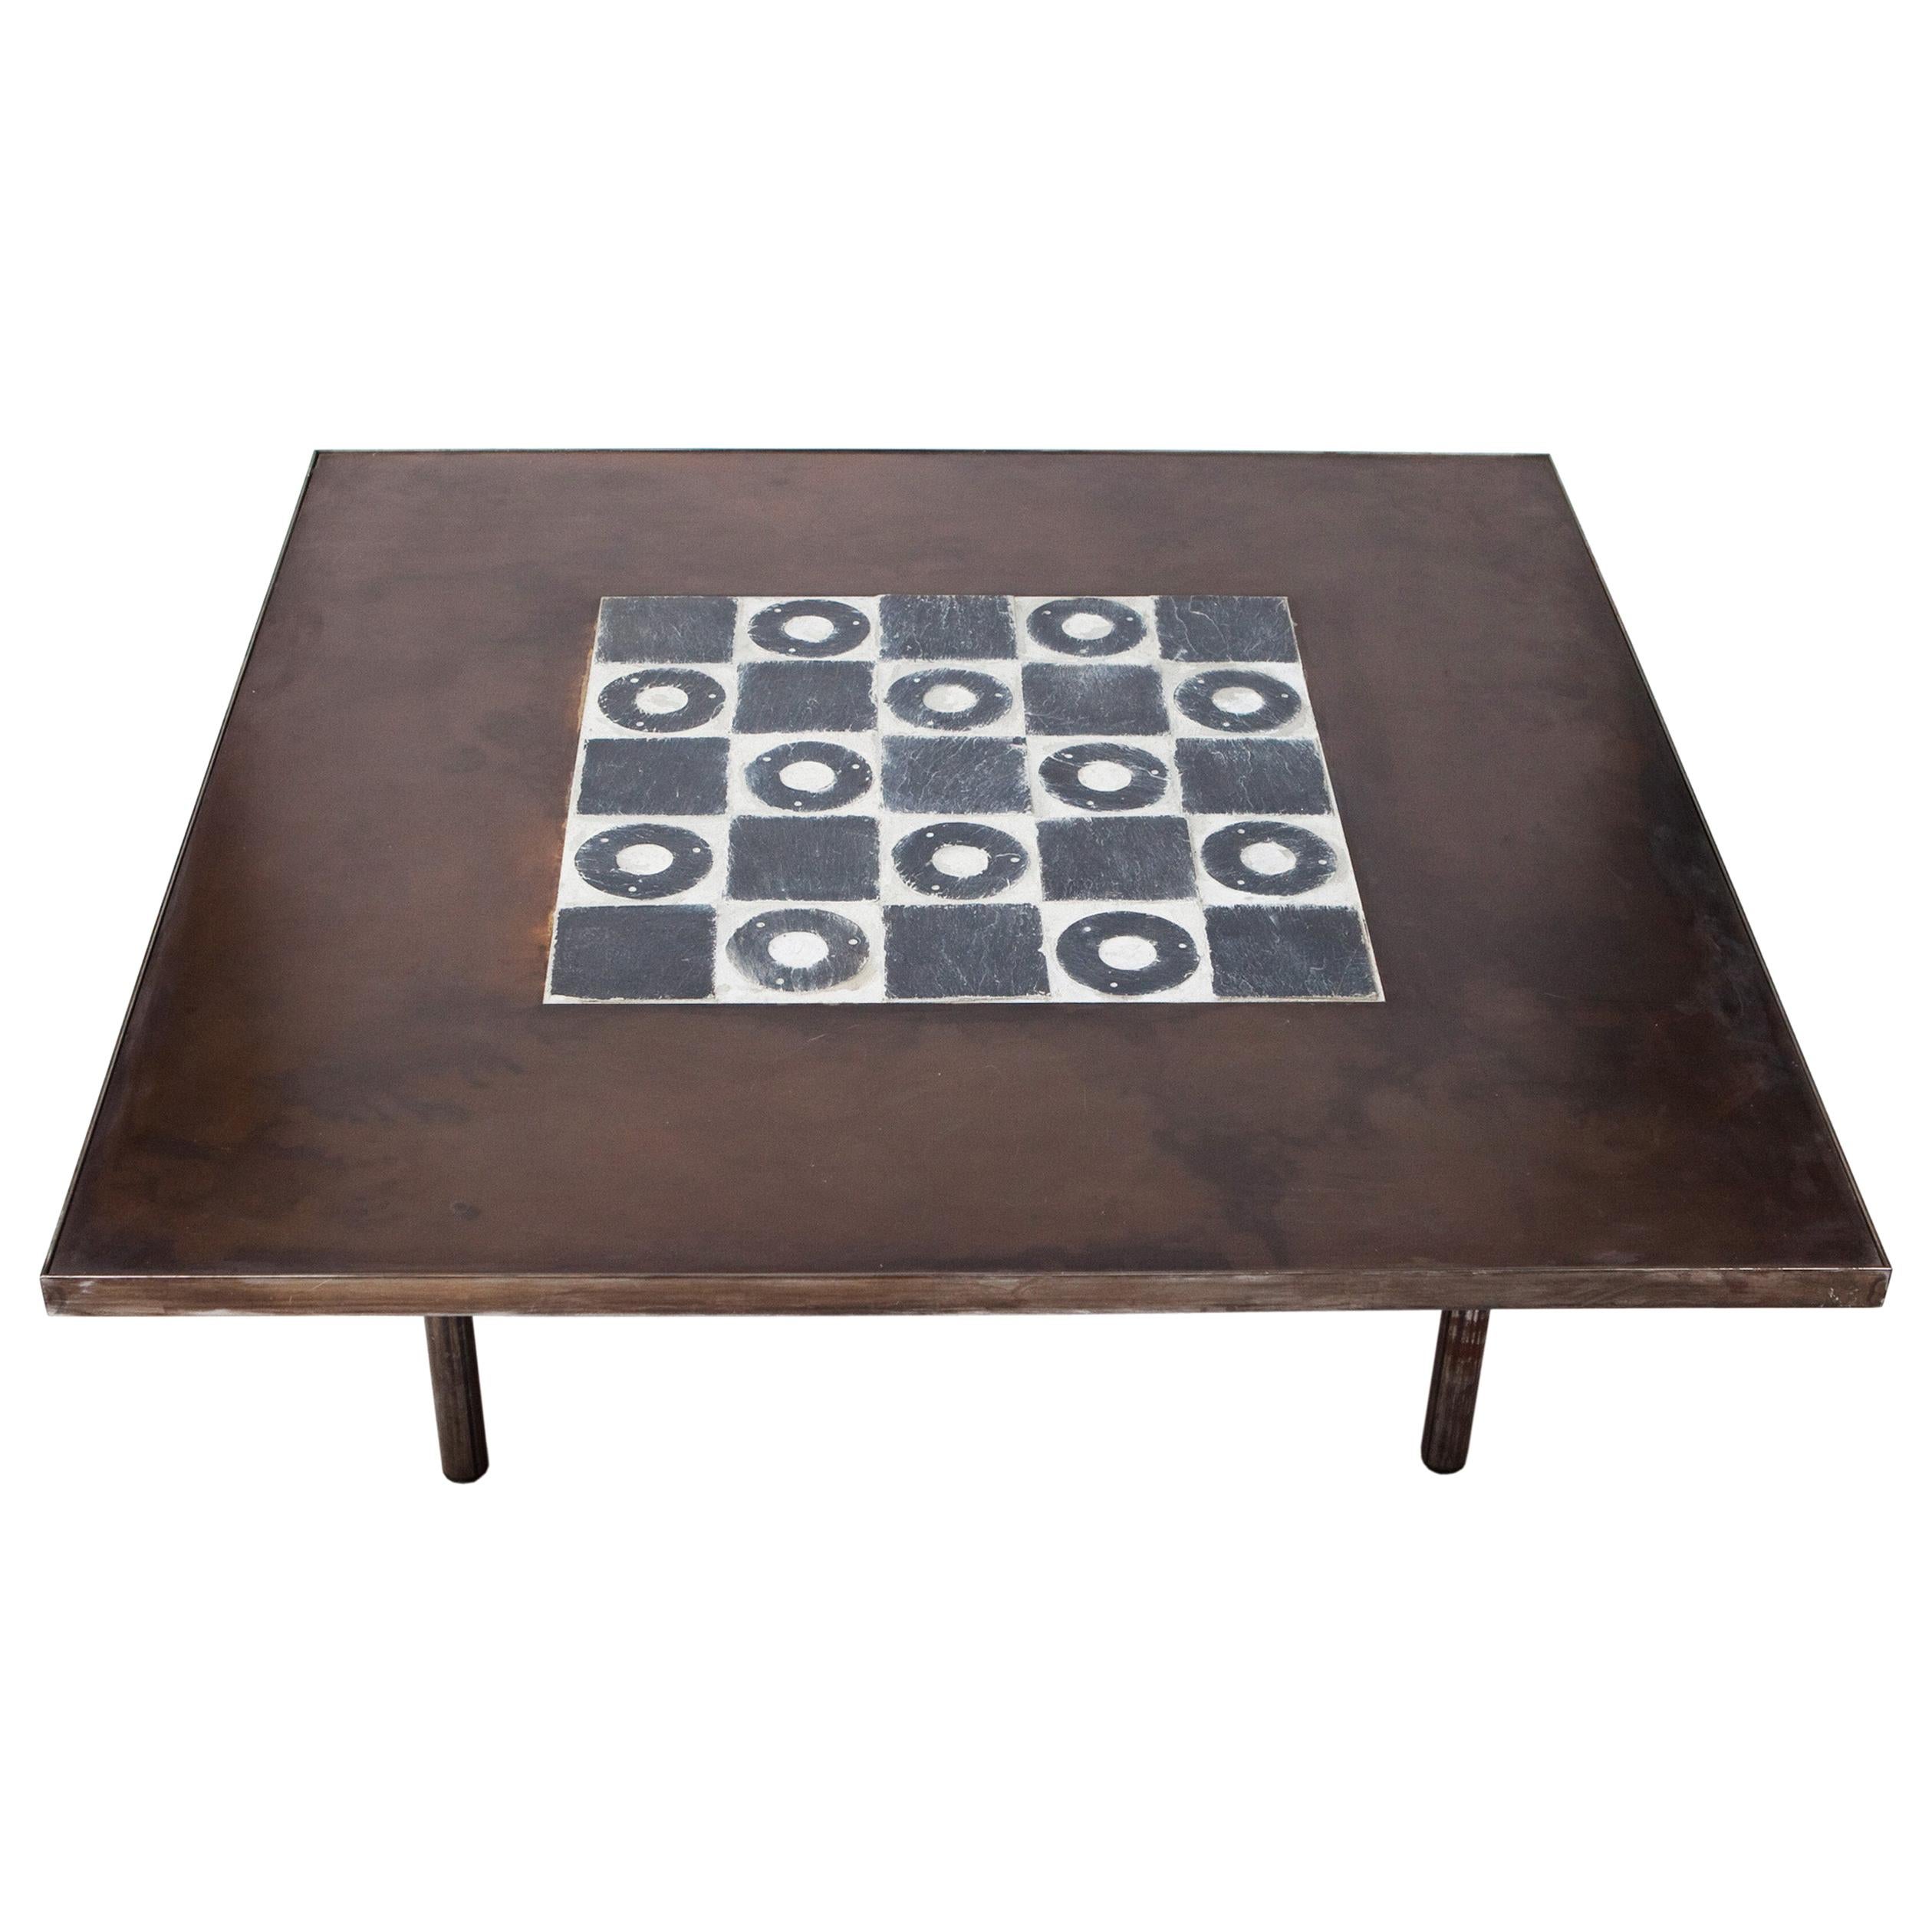 Low Tiles Table